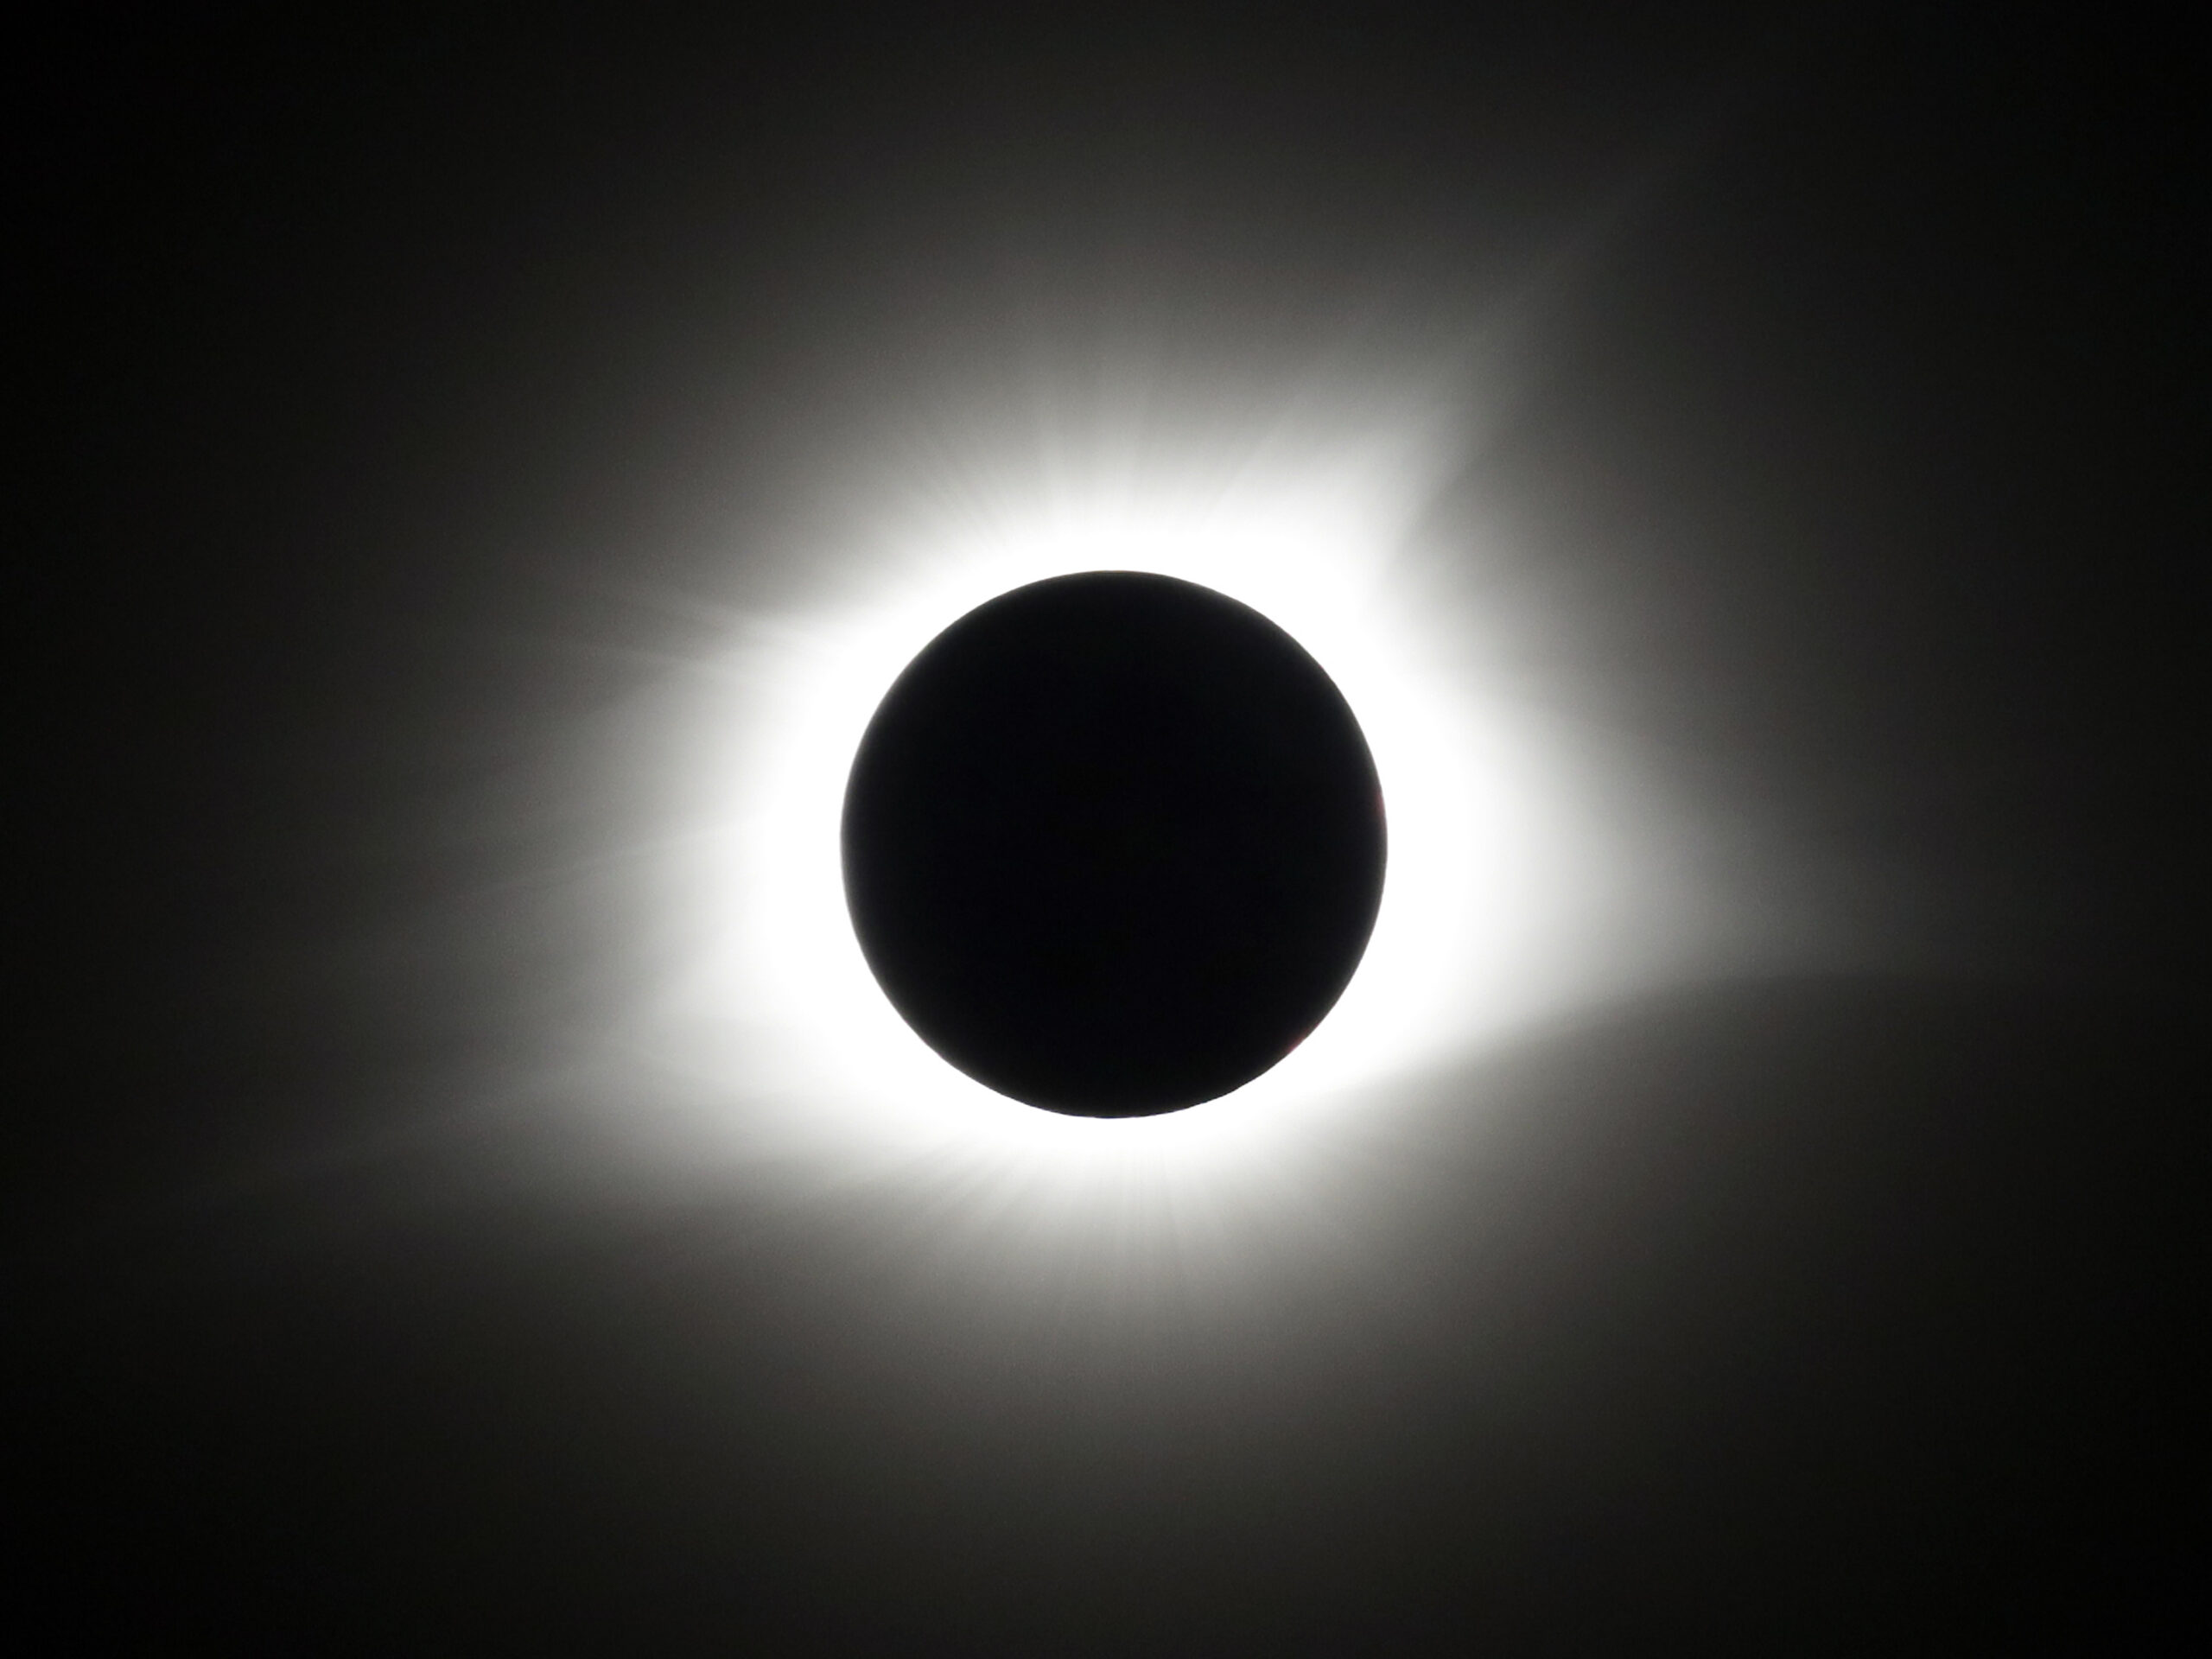 Storms moving across the United States will make it hard for eclipse chasers to get a clear view of totality — the moment when the moon fully blocks the sun, creating a brilliant crown-like effect.